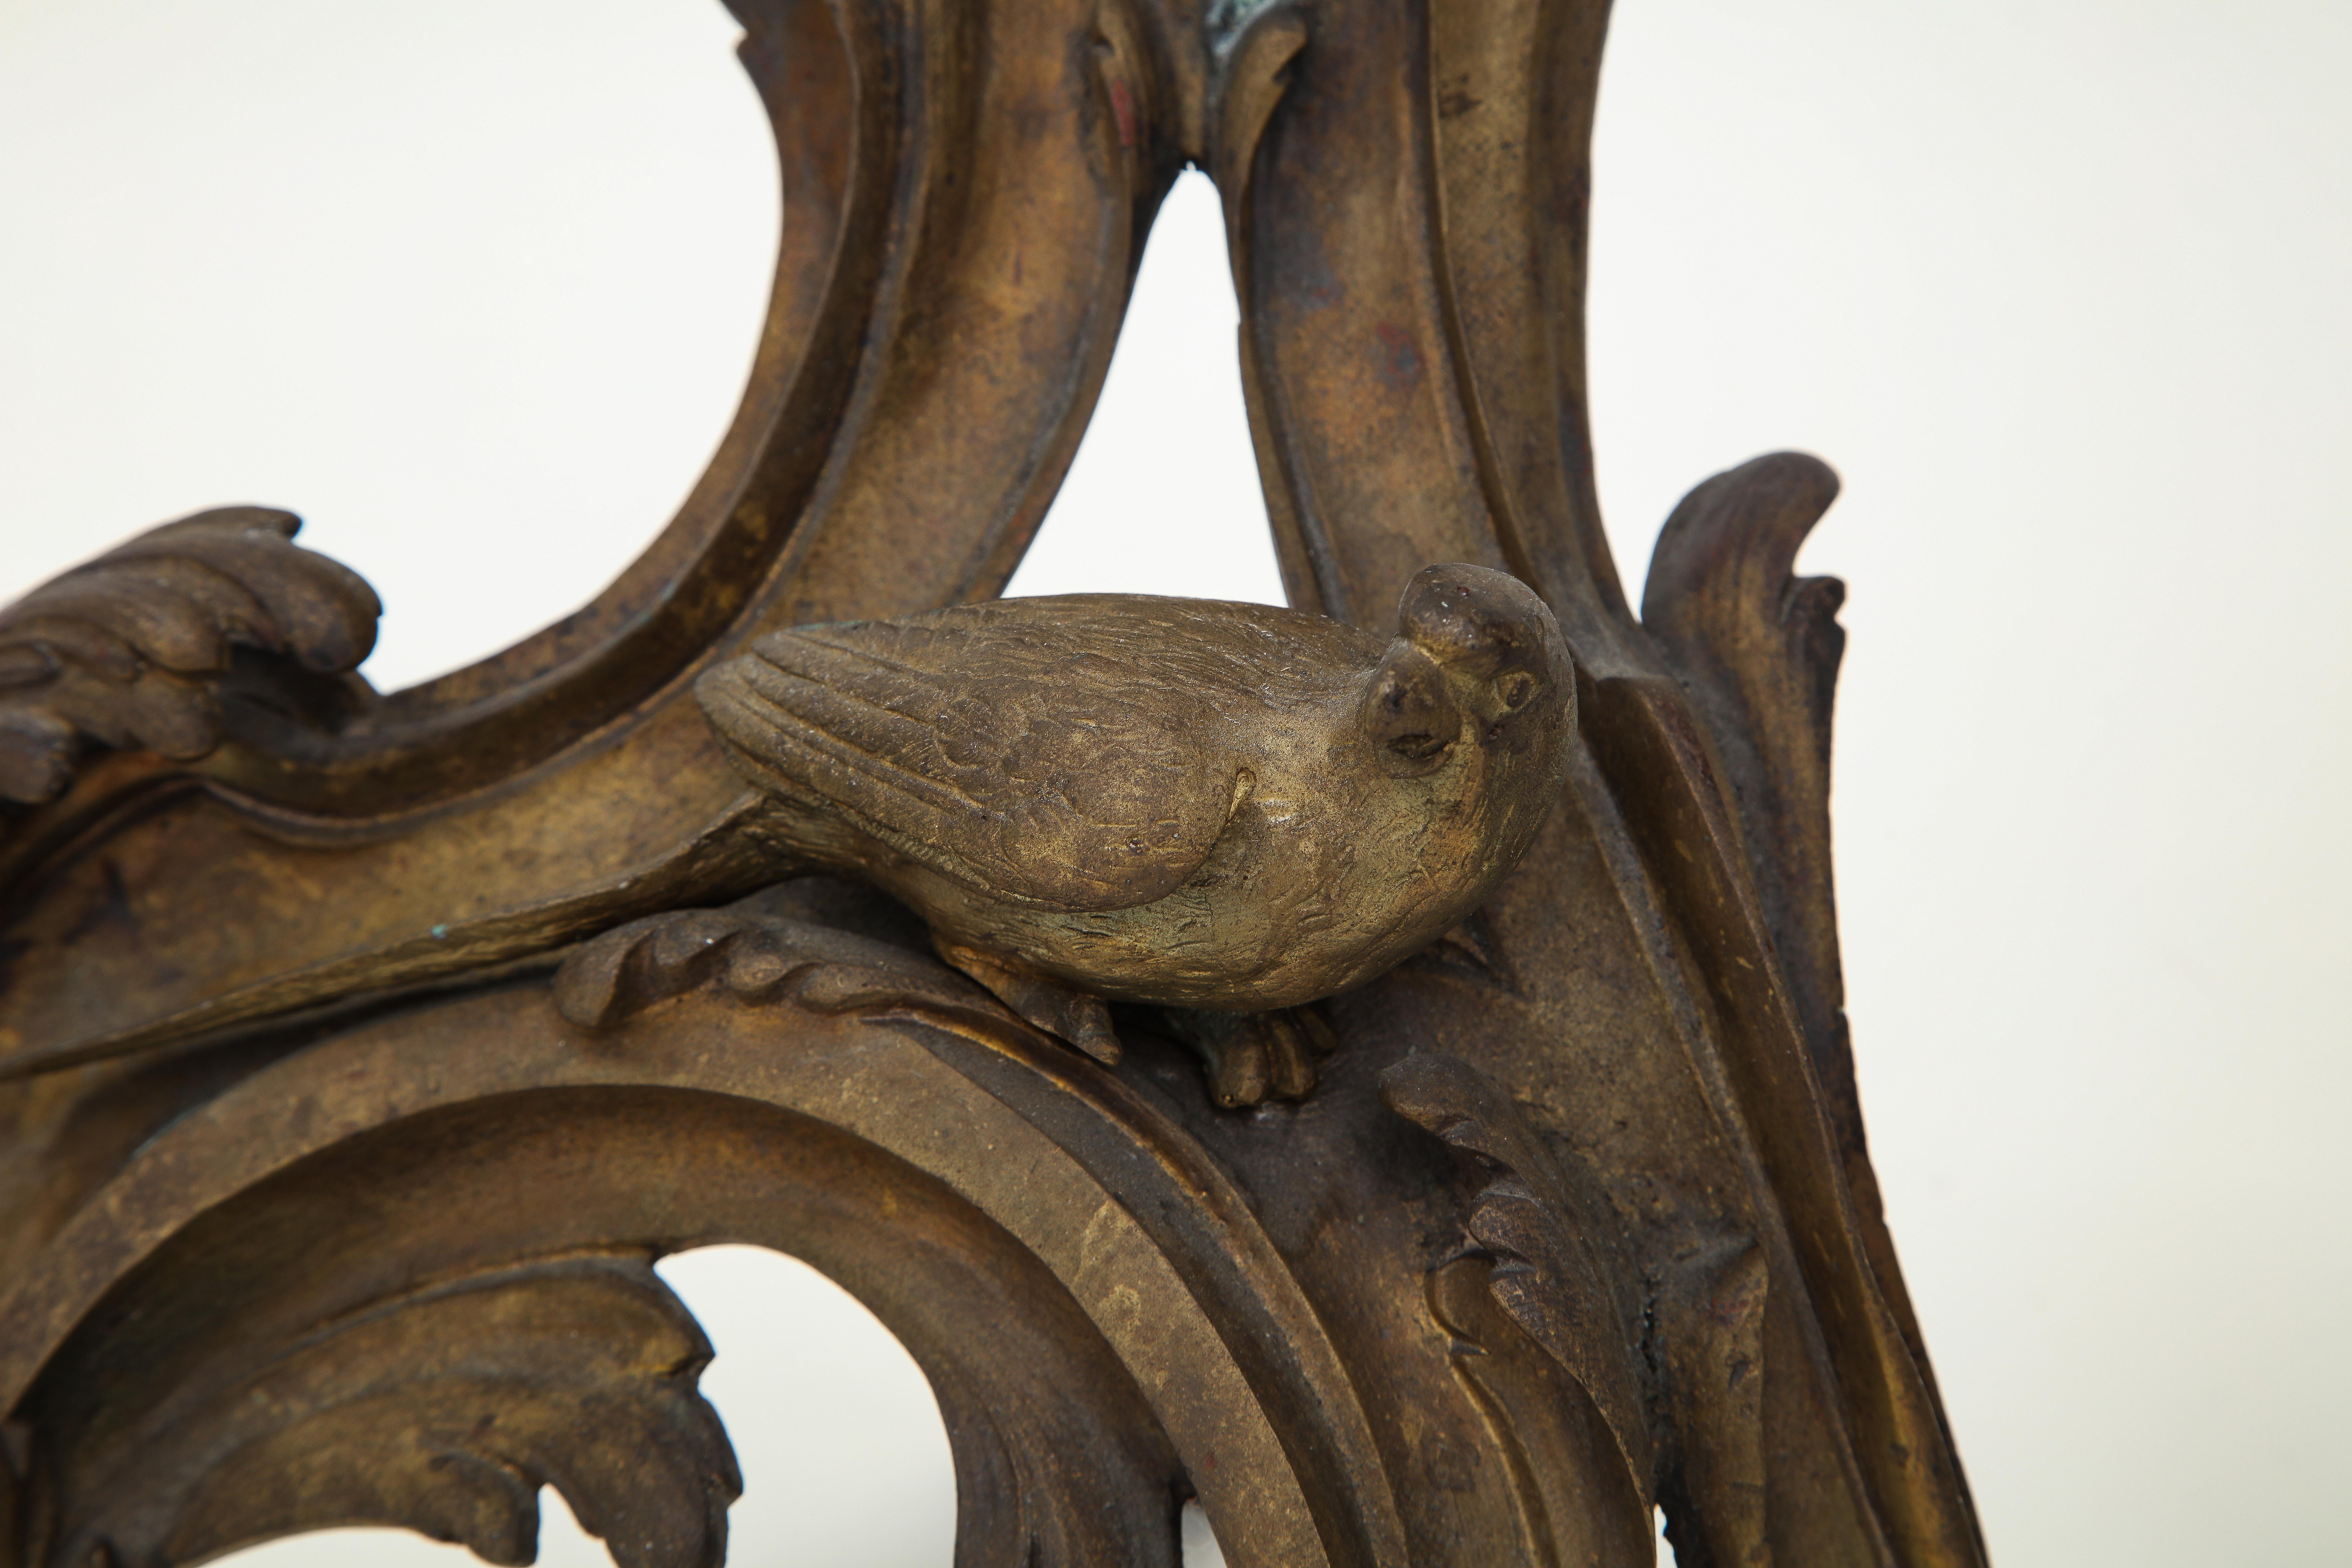 Each sculpted with a bird perched on foliate C-scrolls.

Provenance: The estate of Samuel P. Reed.